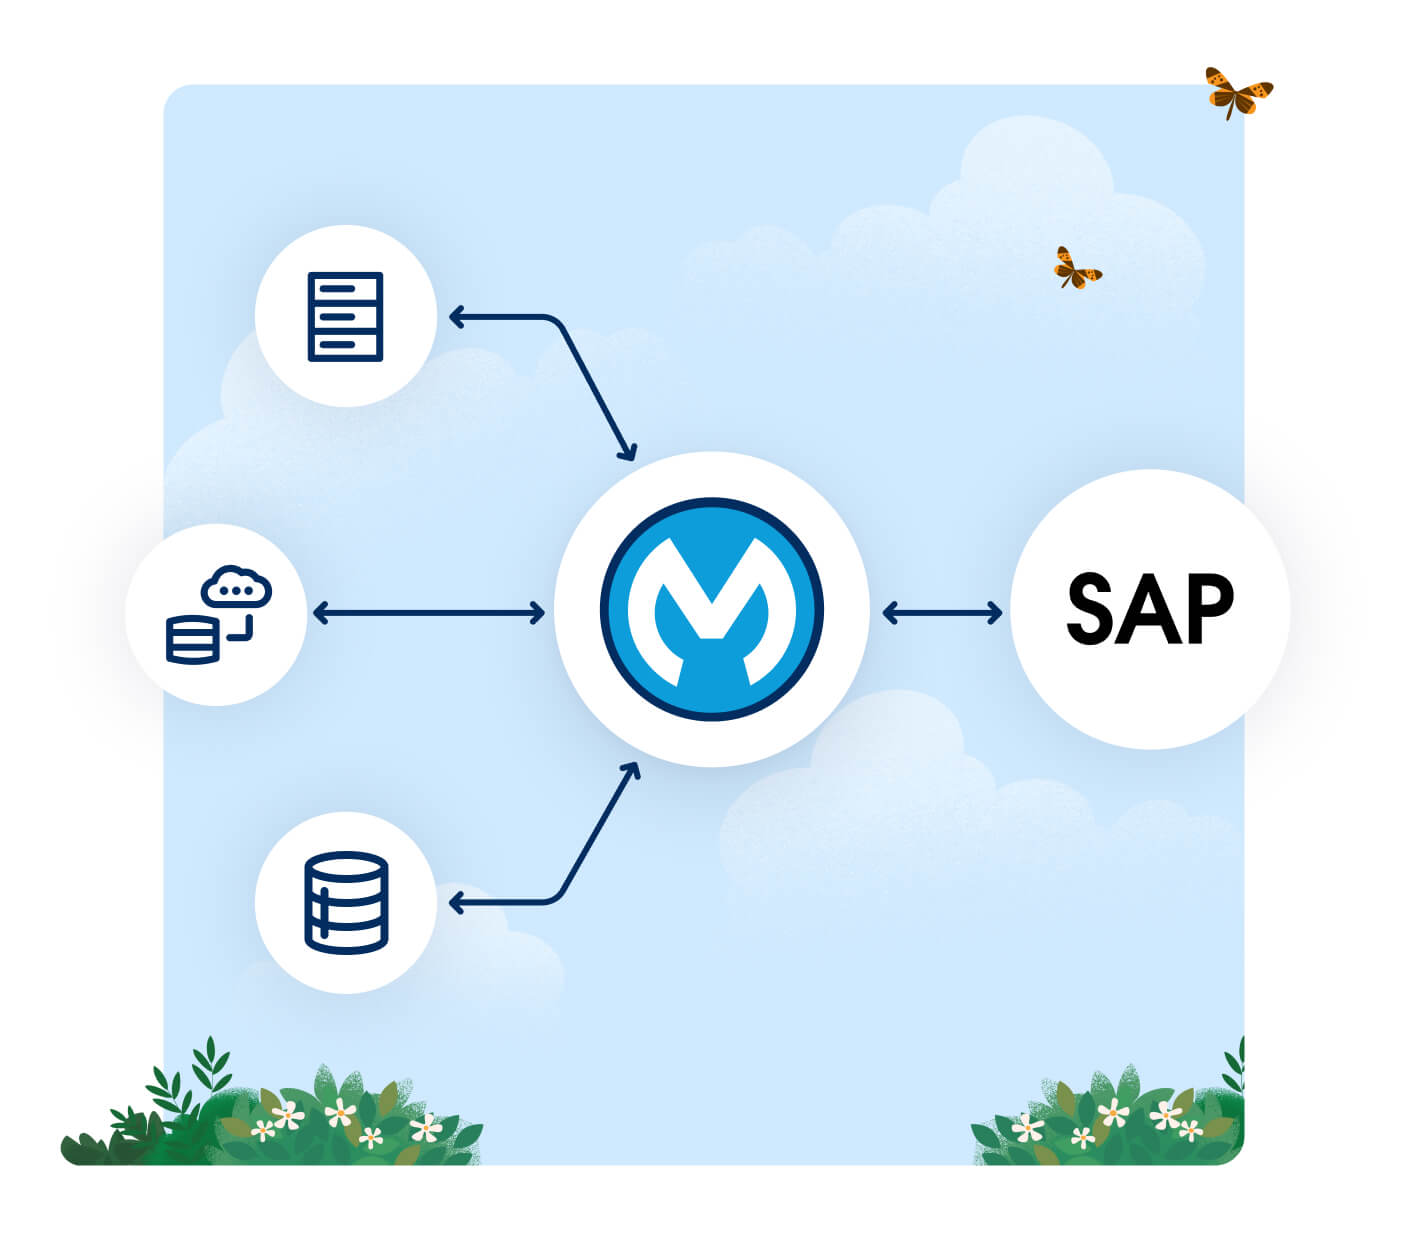 Industry leading connectivity with MuleSoft